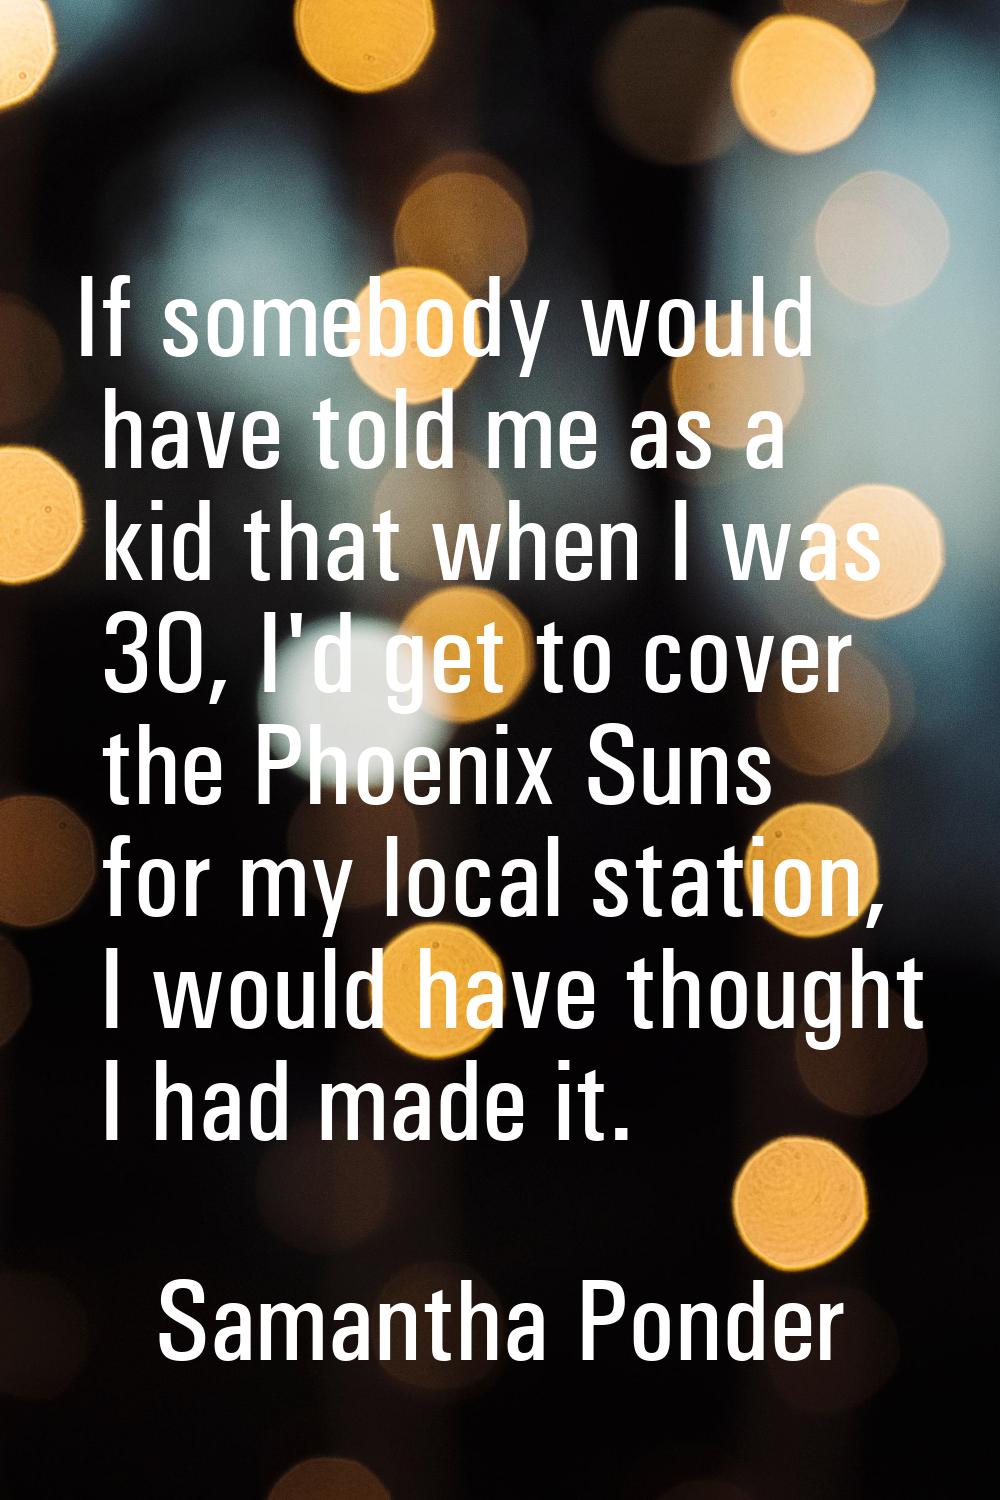 If somebody would have told me as a kid that when I was 30, I'd get to cover the Phoenix Suns for m